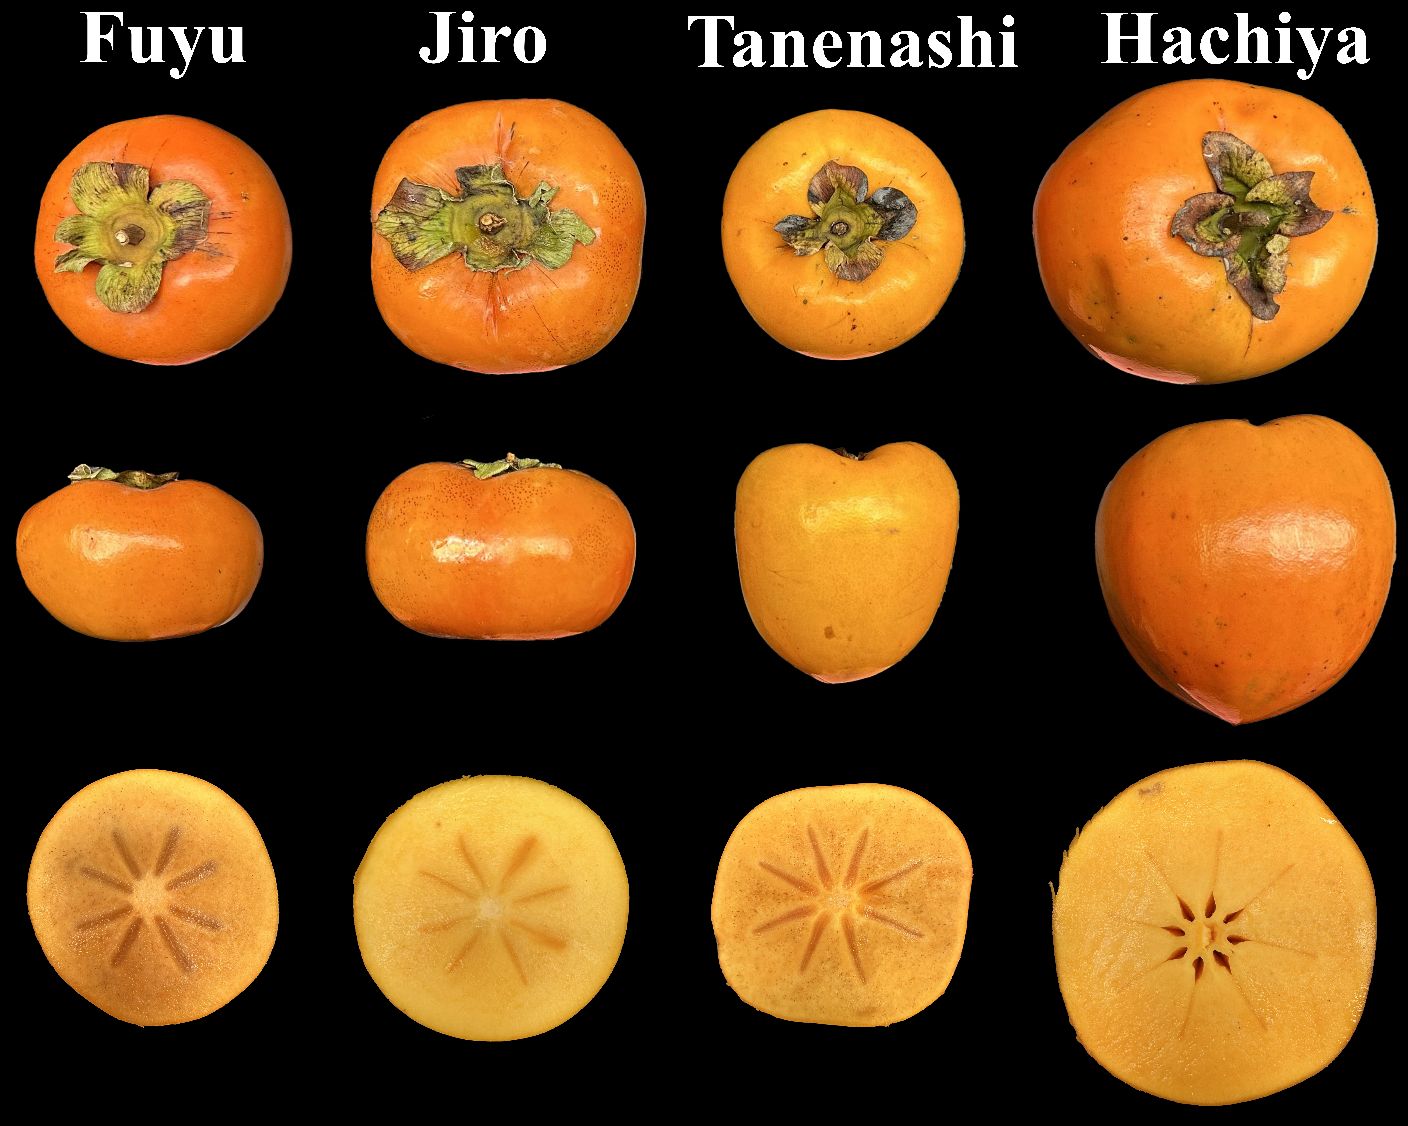 Intact fruit and equatorial cross-sections of the non-astringent ‘Fuyu’ and ‘Jiro’ varieties and the astringent ‘Tanenashi’ and ‘Hachiya’ varieties.